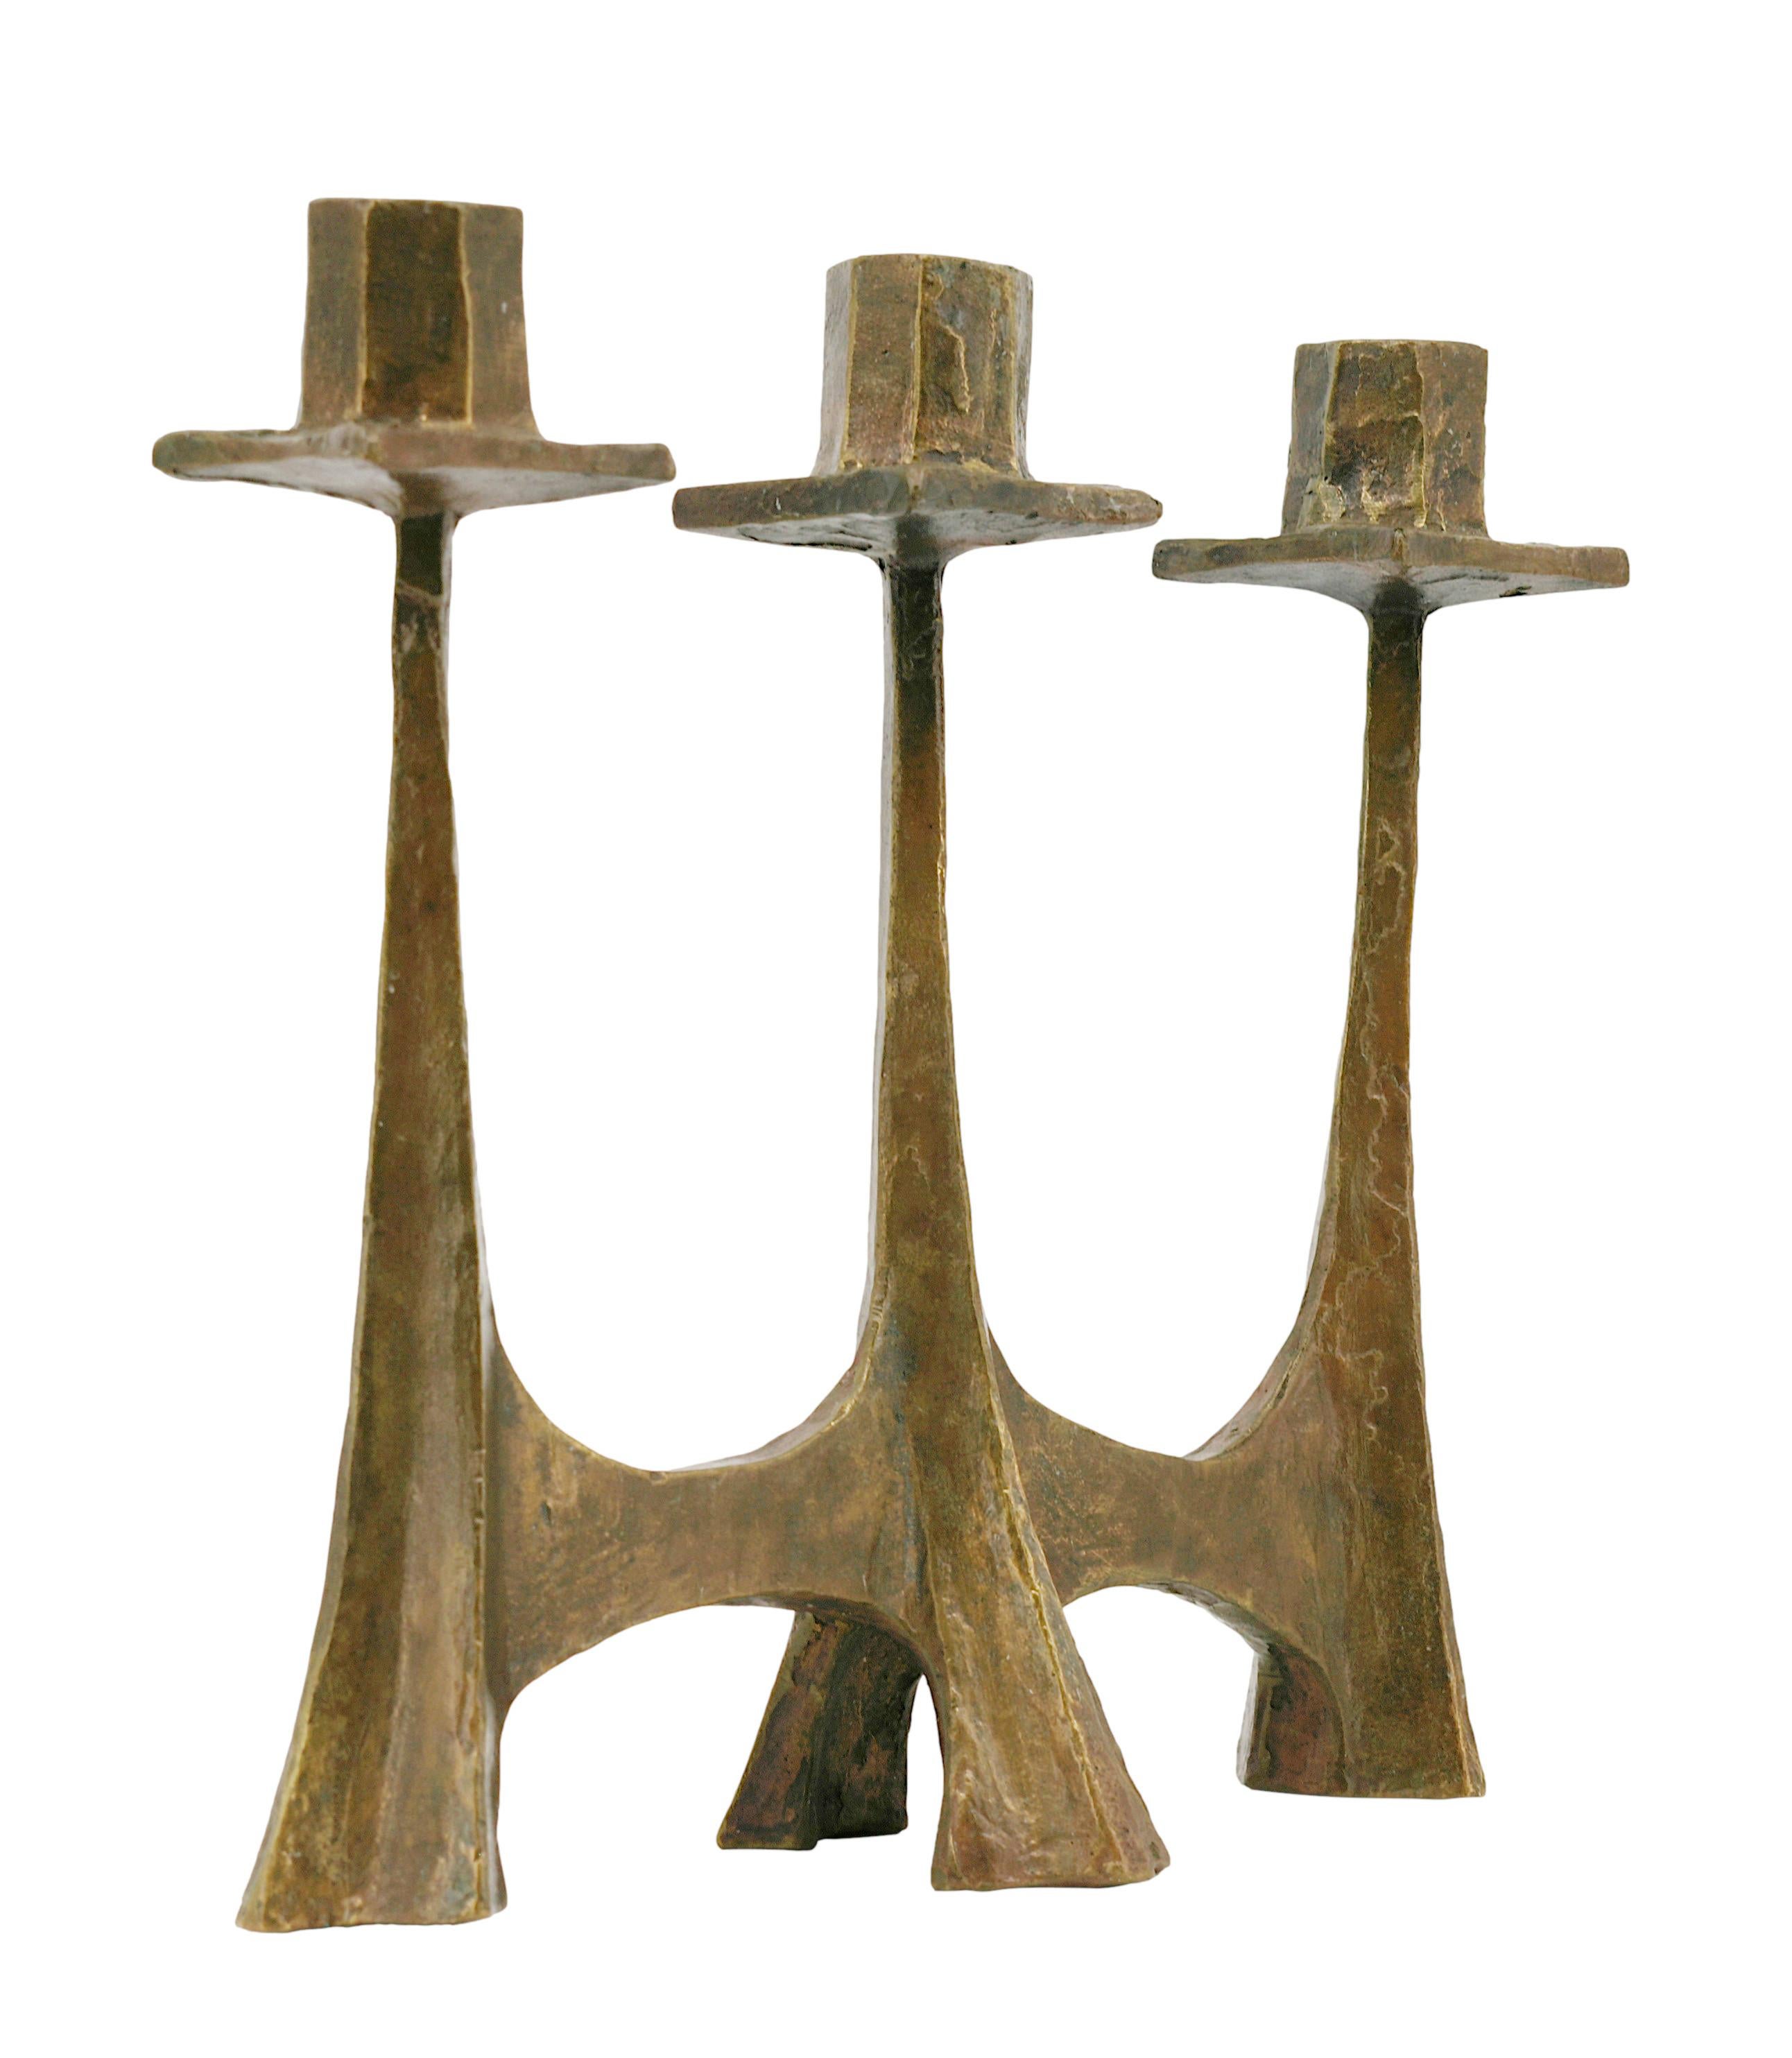 French Midcentury bronze candelabra in the taste of  Ateliers de Marolles, France, ca.1950. Liturgical candelabra of raw and rustic shape in the style of the Ateliers de Marolles. Height : 10.2